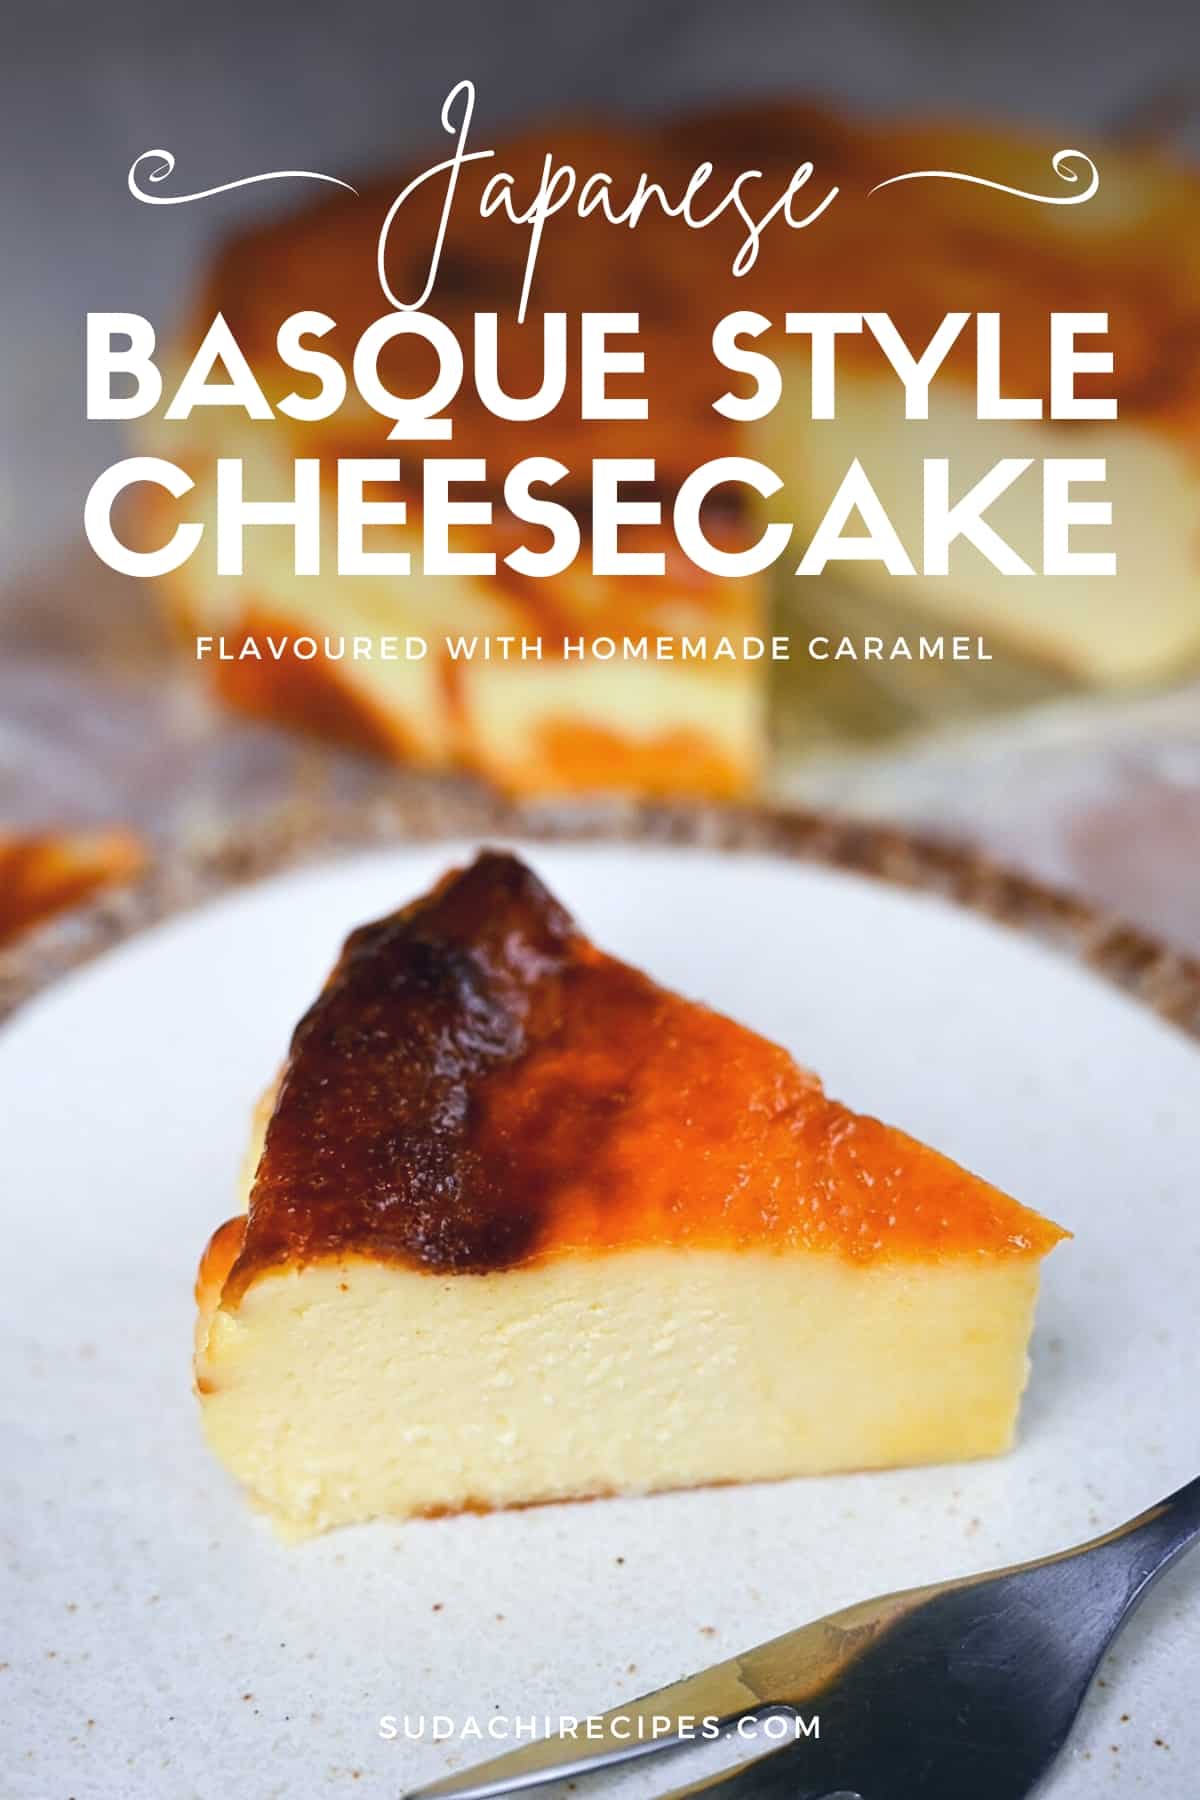 Japanese basque style cheesecake flavoured with caramel (and inspired by Lawson's baschee)